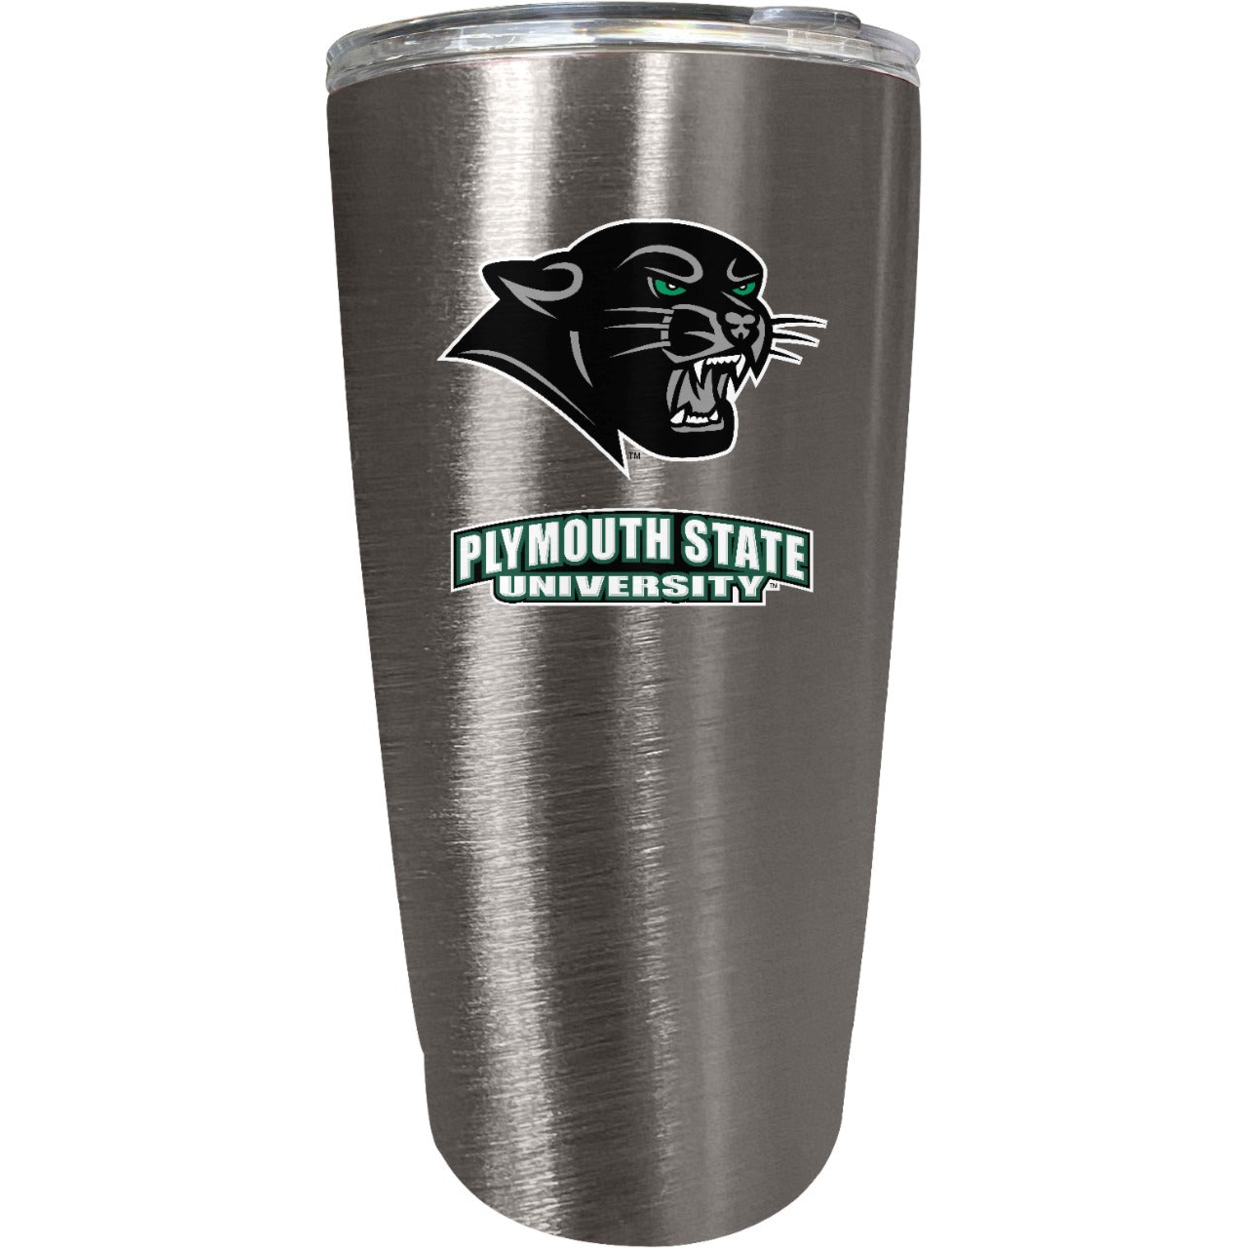 Plymouth State University 16 Oz Insulated Stainless Steel Tumbler Colorless